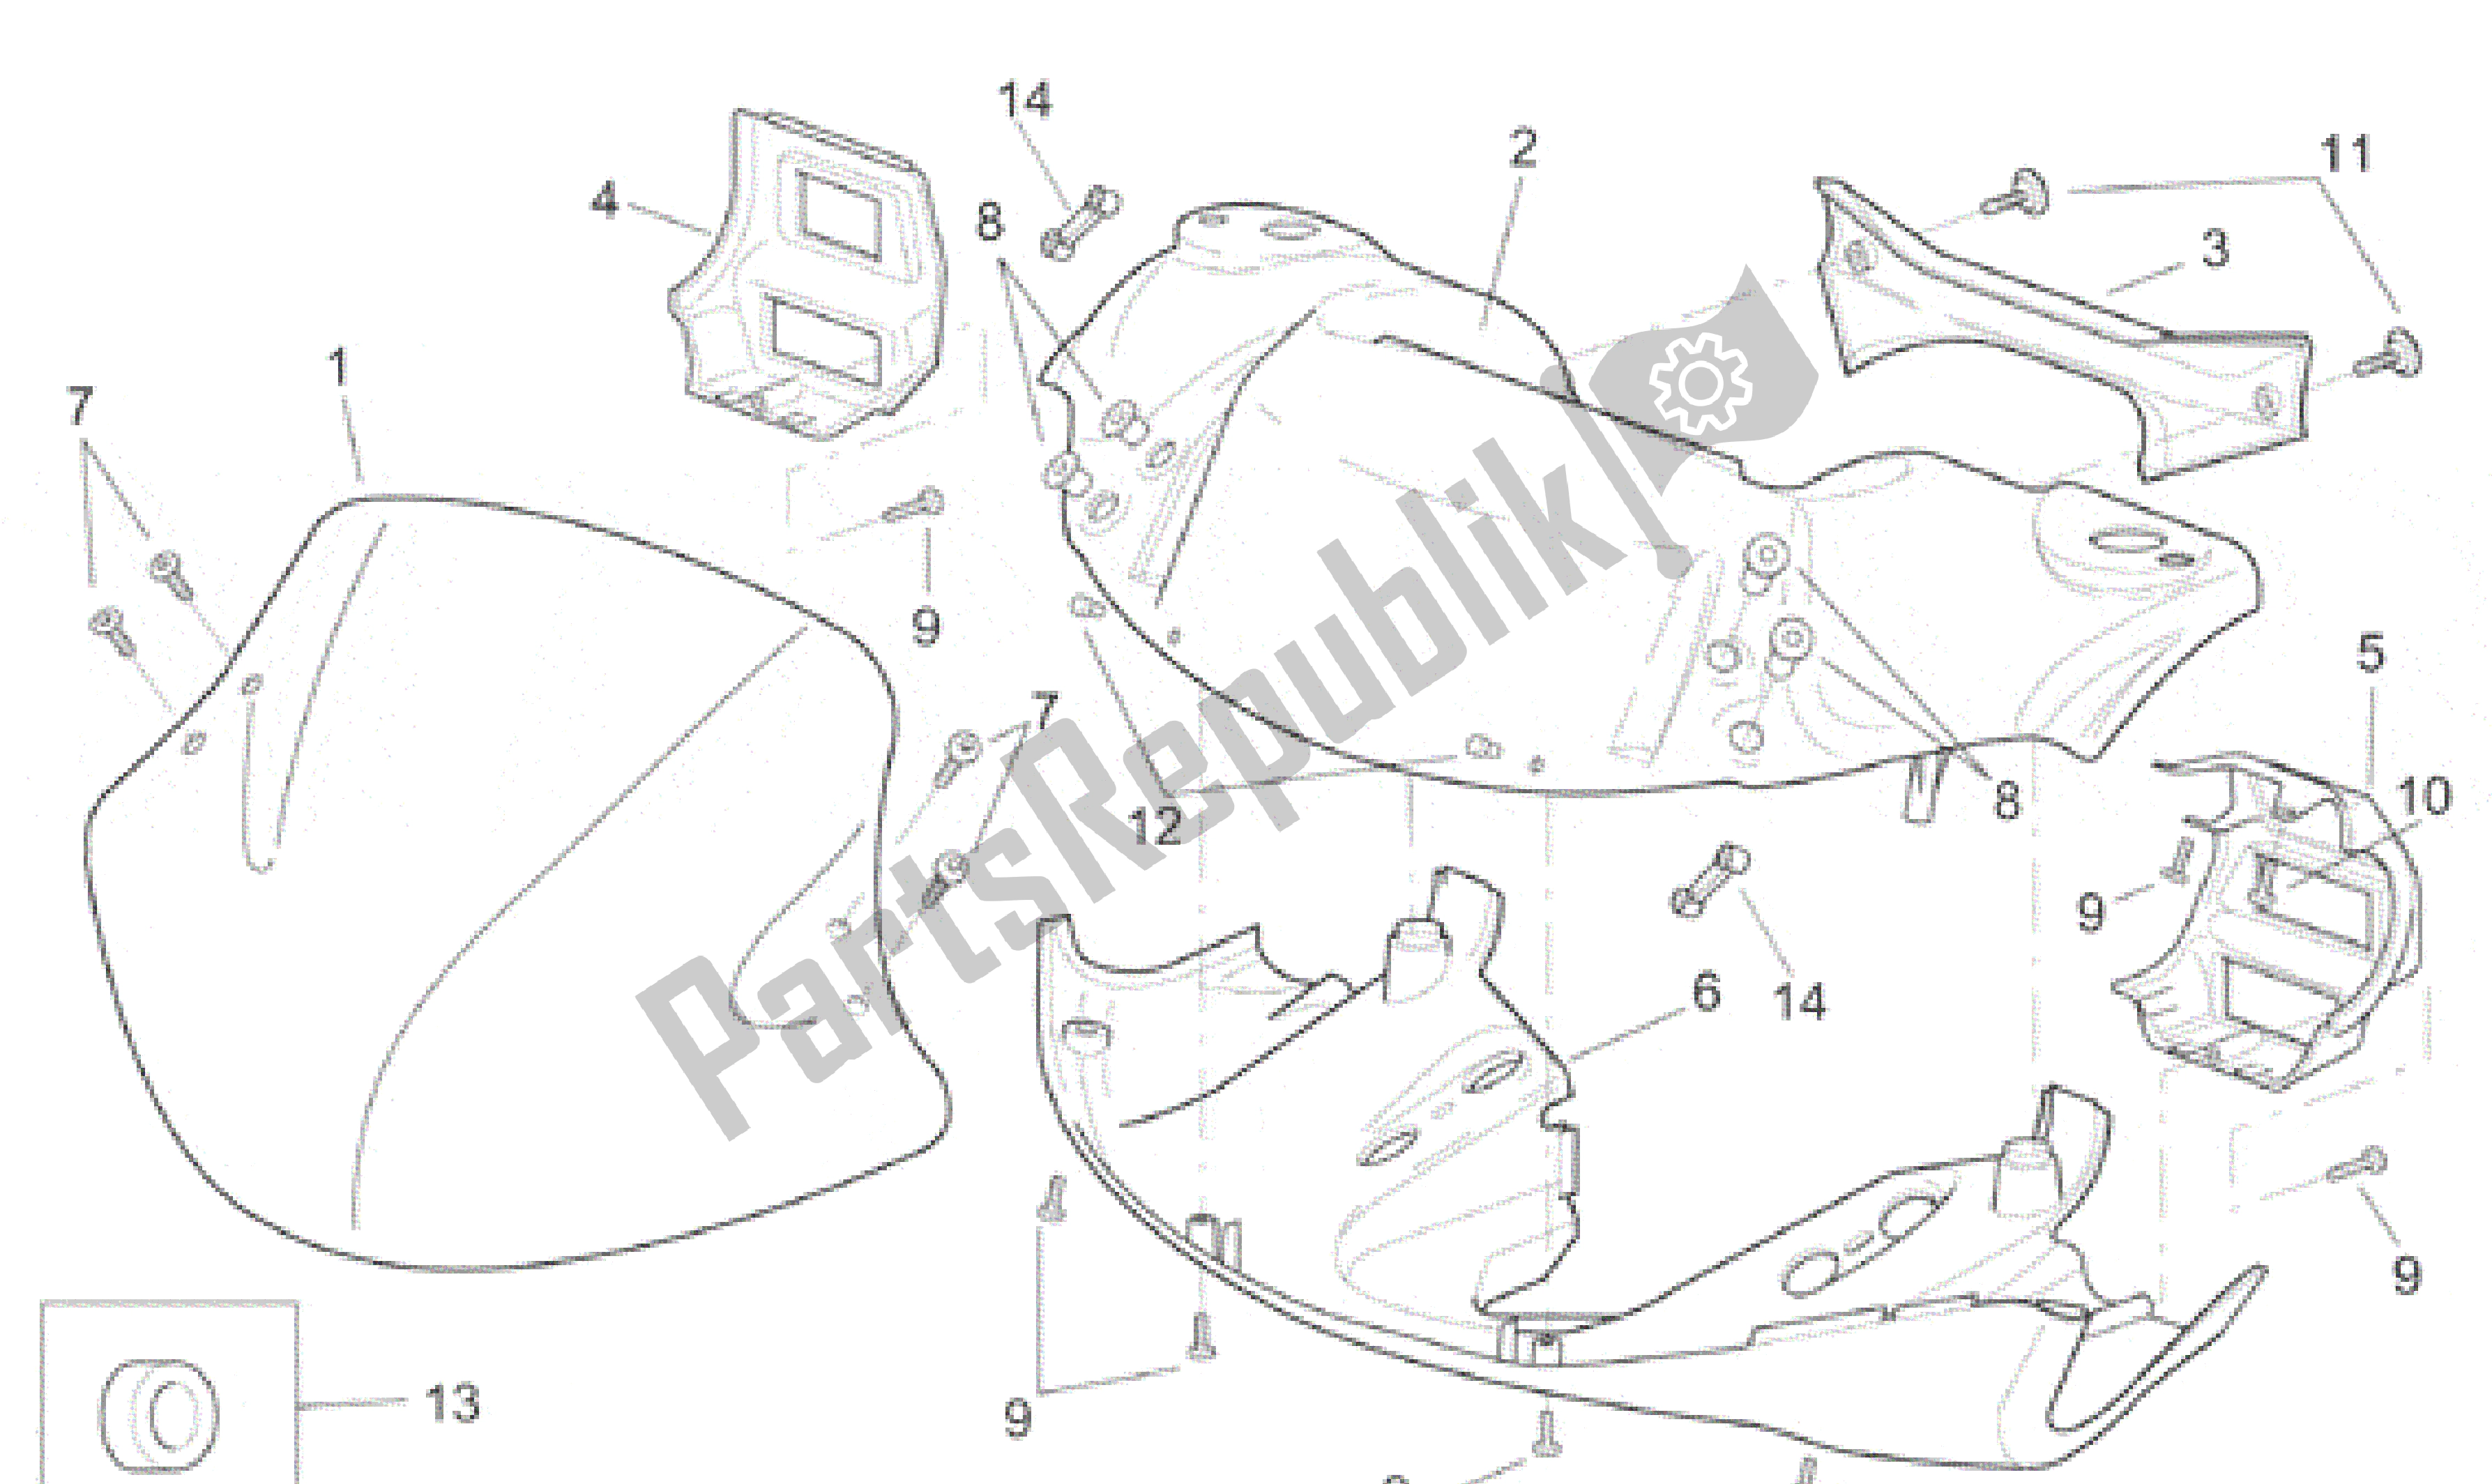 All parts for the Front Body - Front Fairing I of the Aprilia SR 125 1999 - 2001